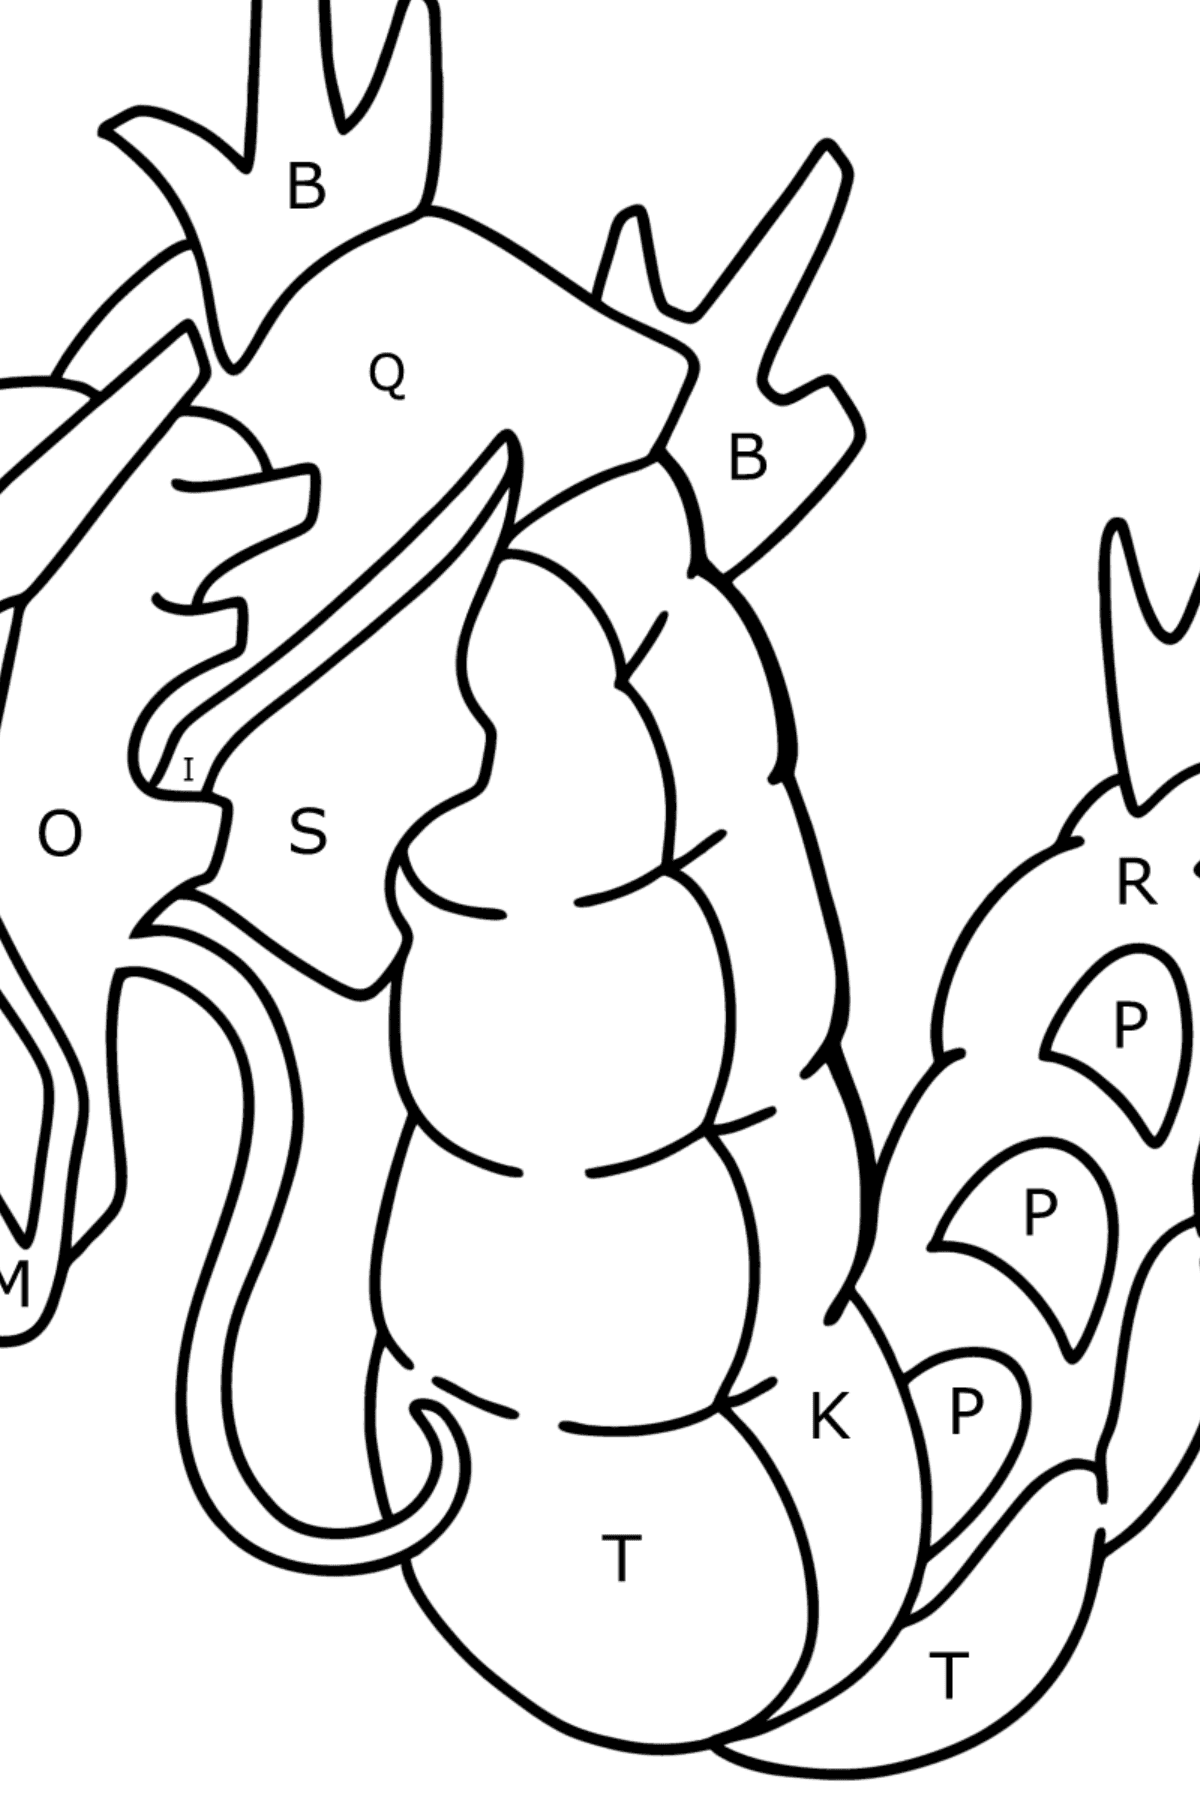 Coloring page Pokemon Go Gyarados - Coloring by Letters for Kids